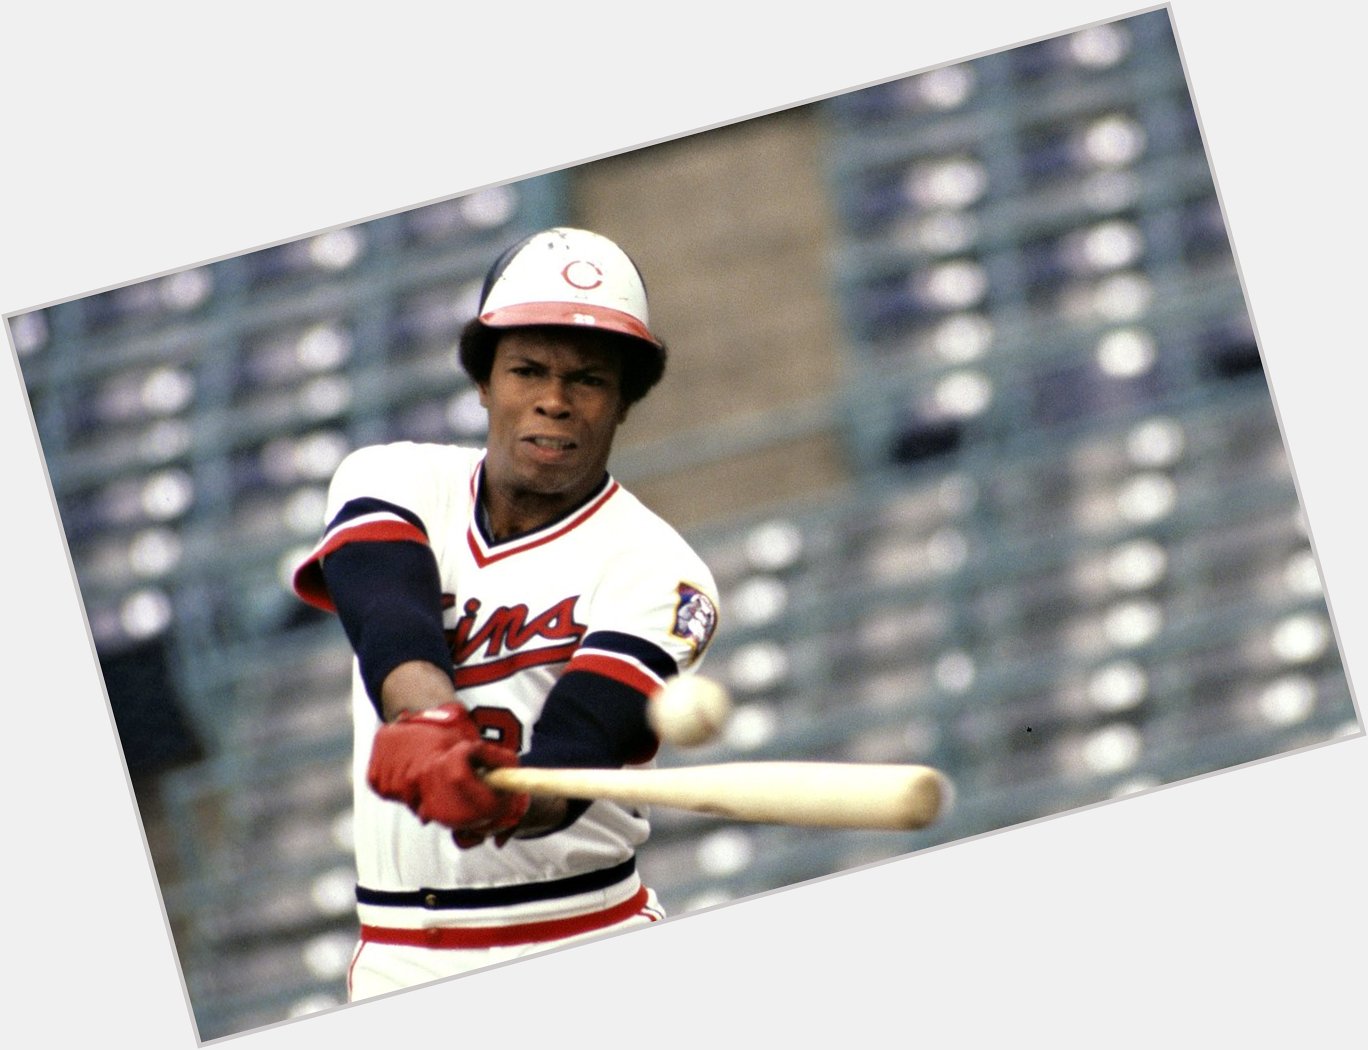 Happy 72nd birthday, Rod Carew.  One of the greatest hitters of all time. 